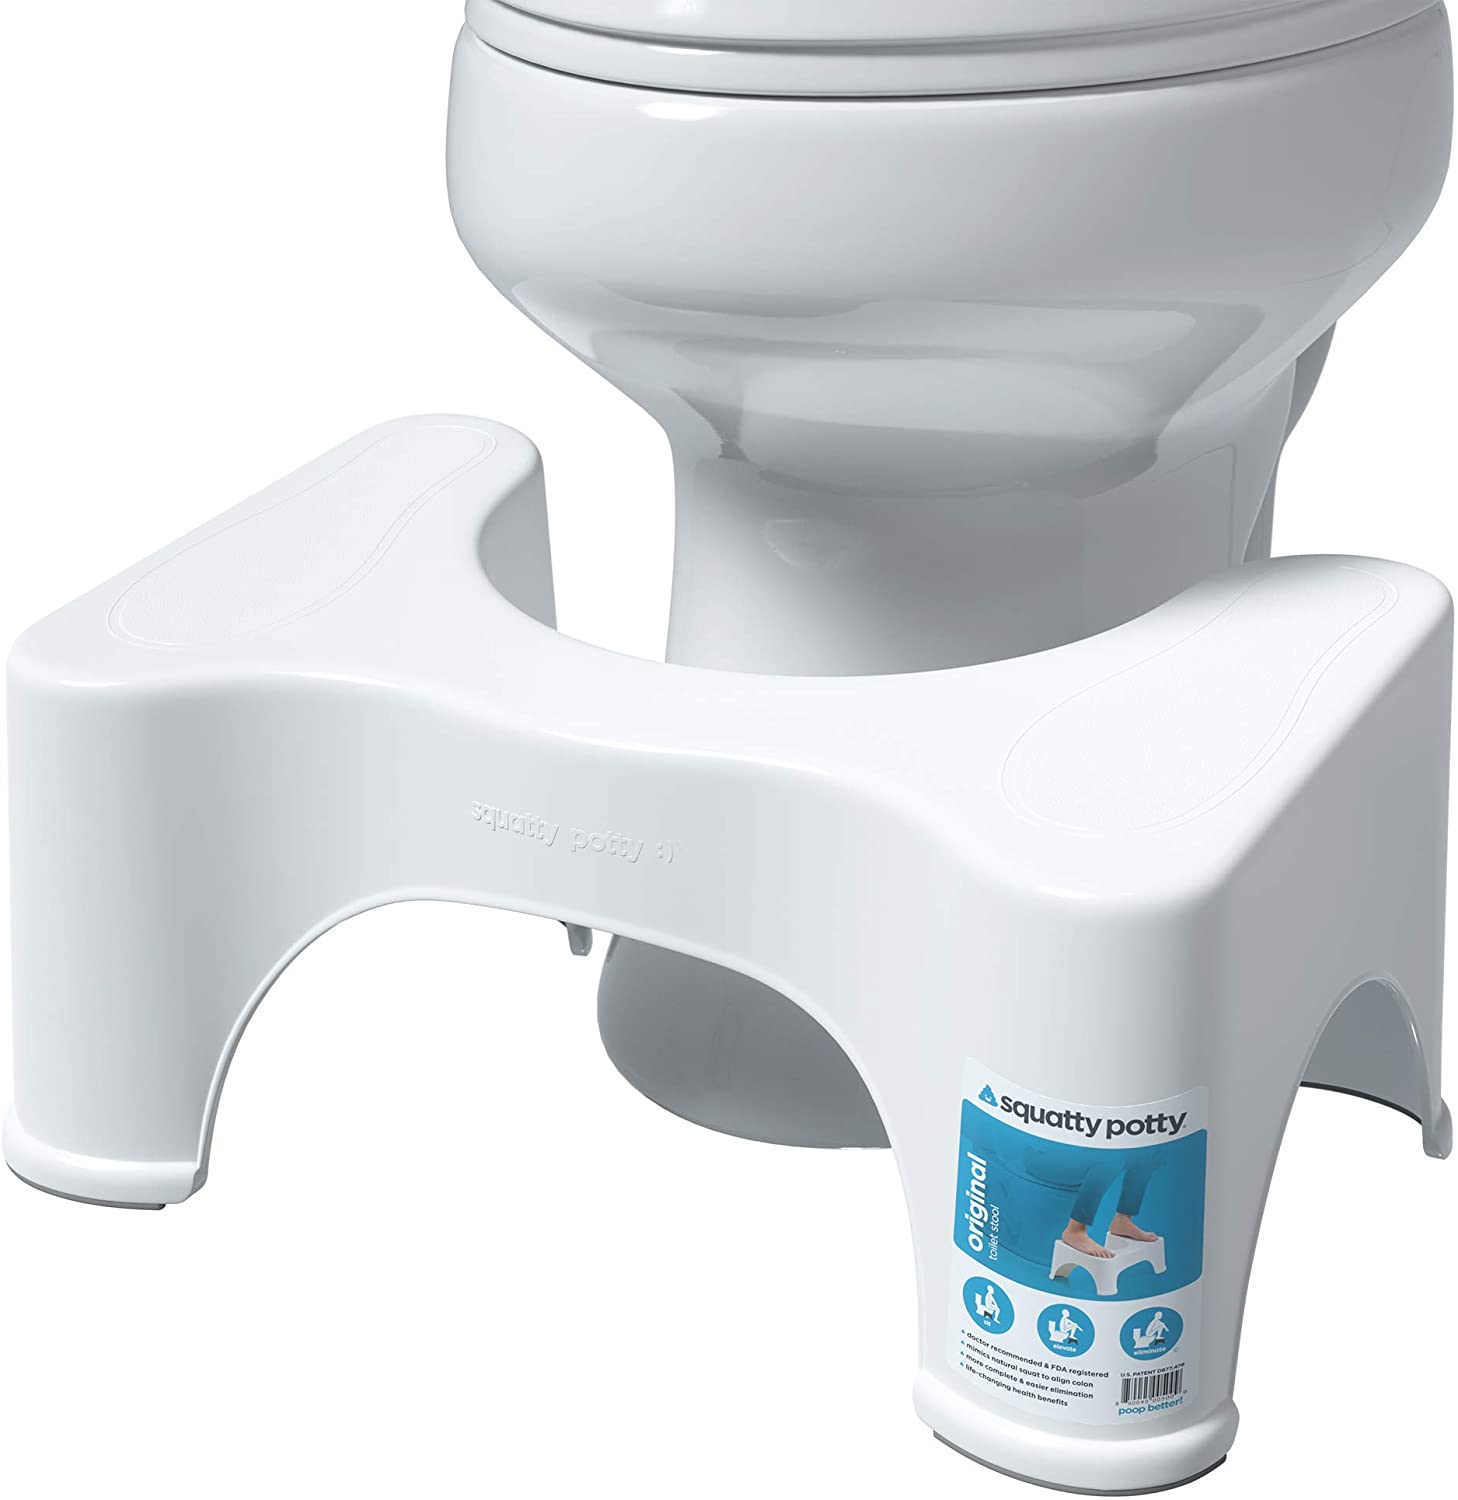 How To Use The Squatty Potty